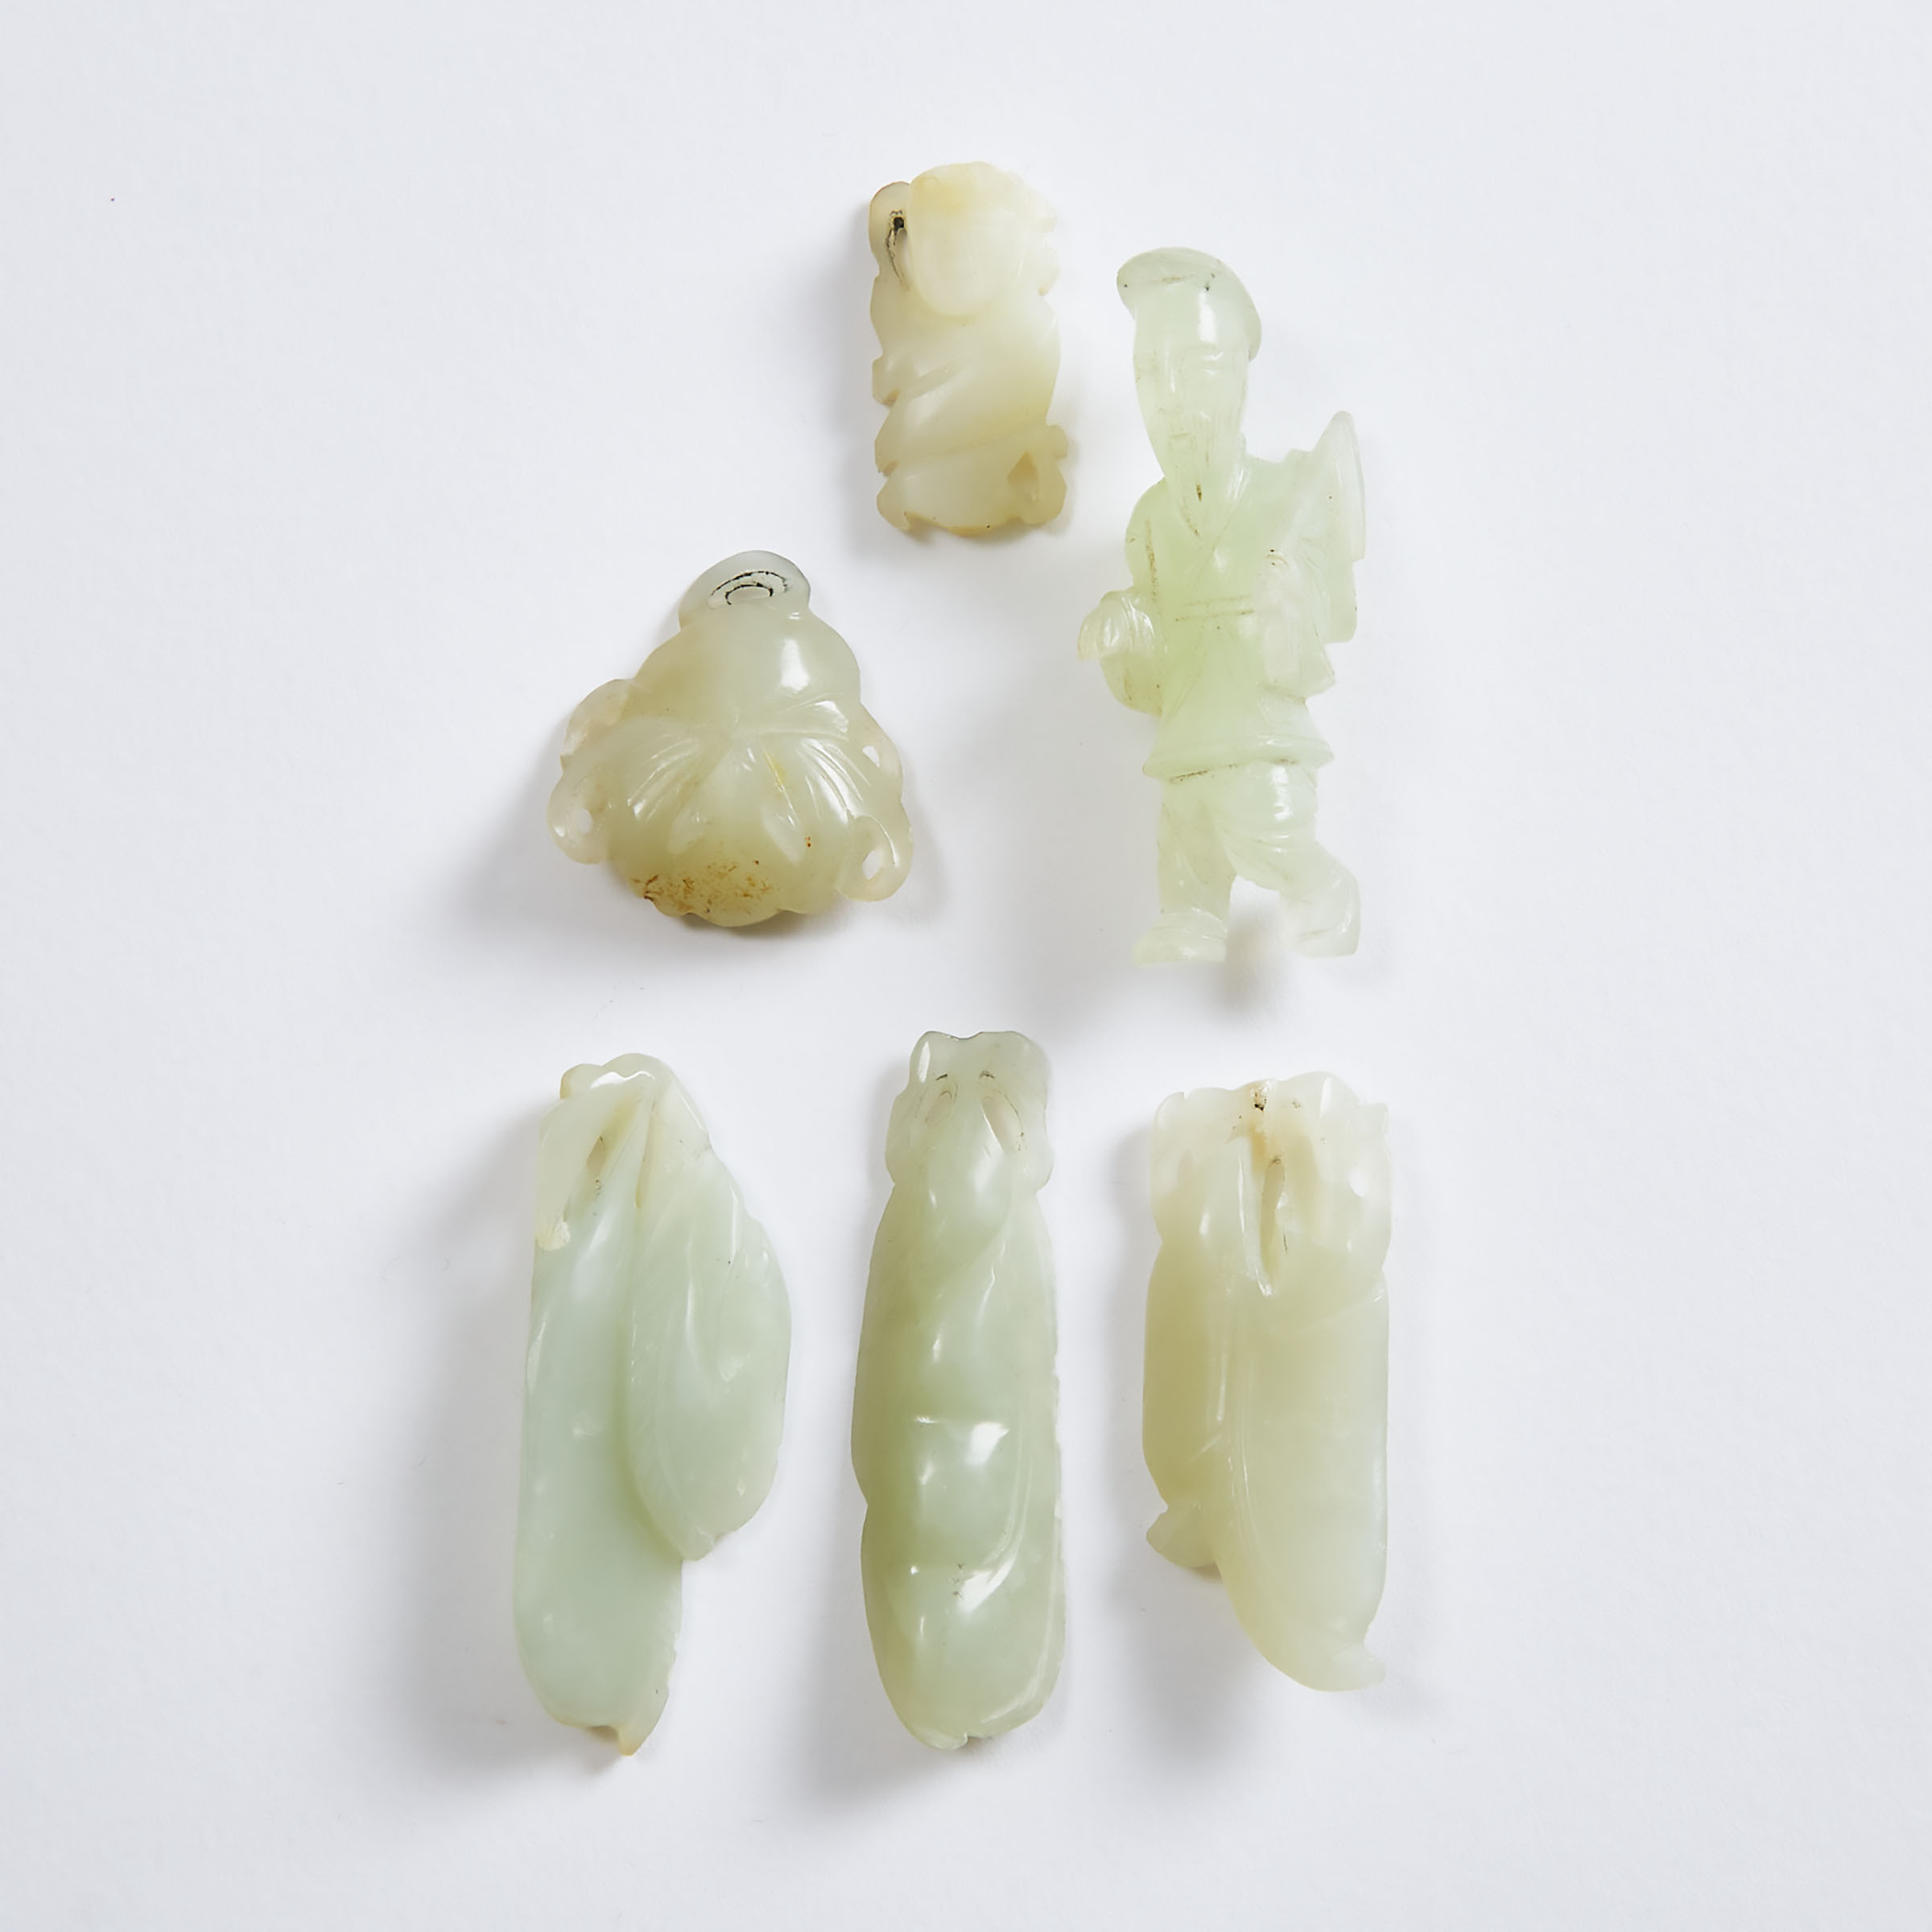 A Group of Six White and Pale Celadon Jade Carvings, Qing Dynasty